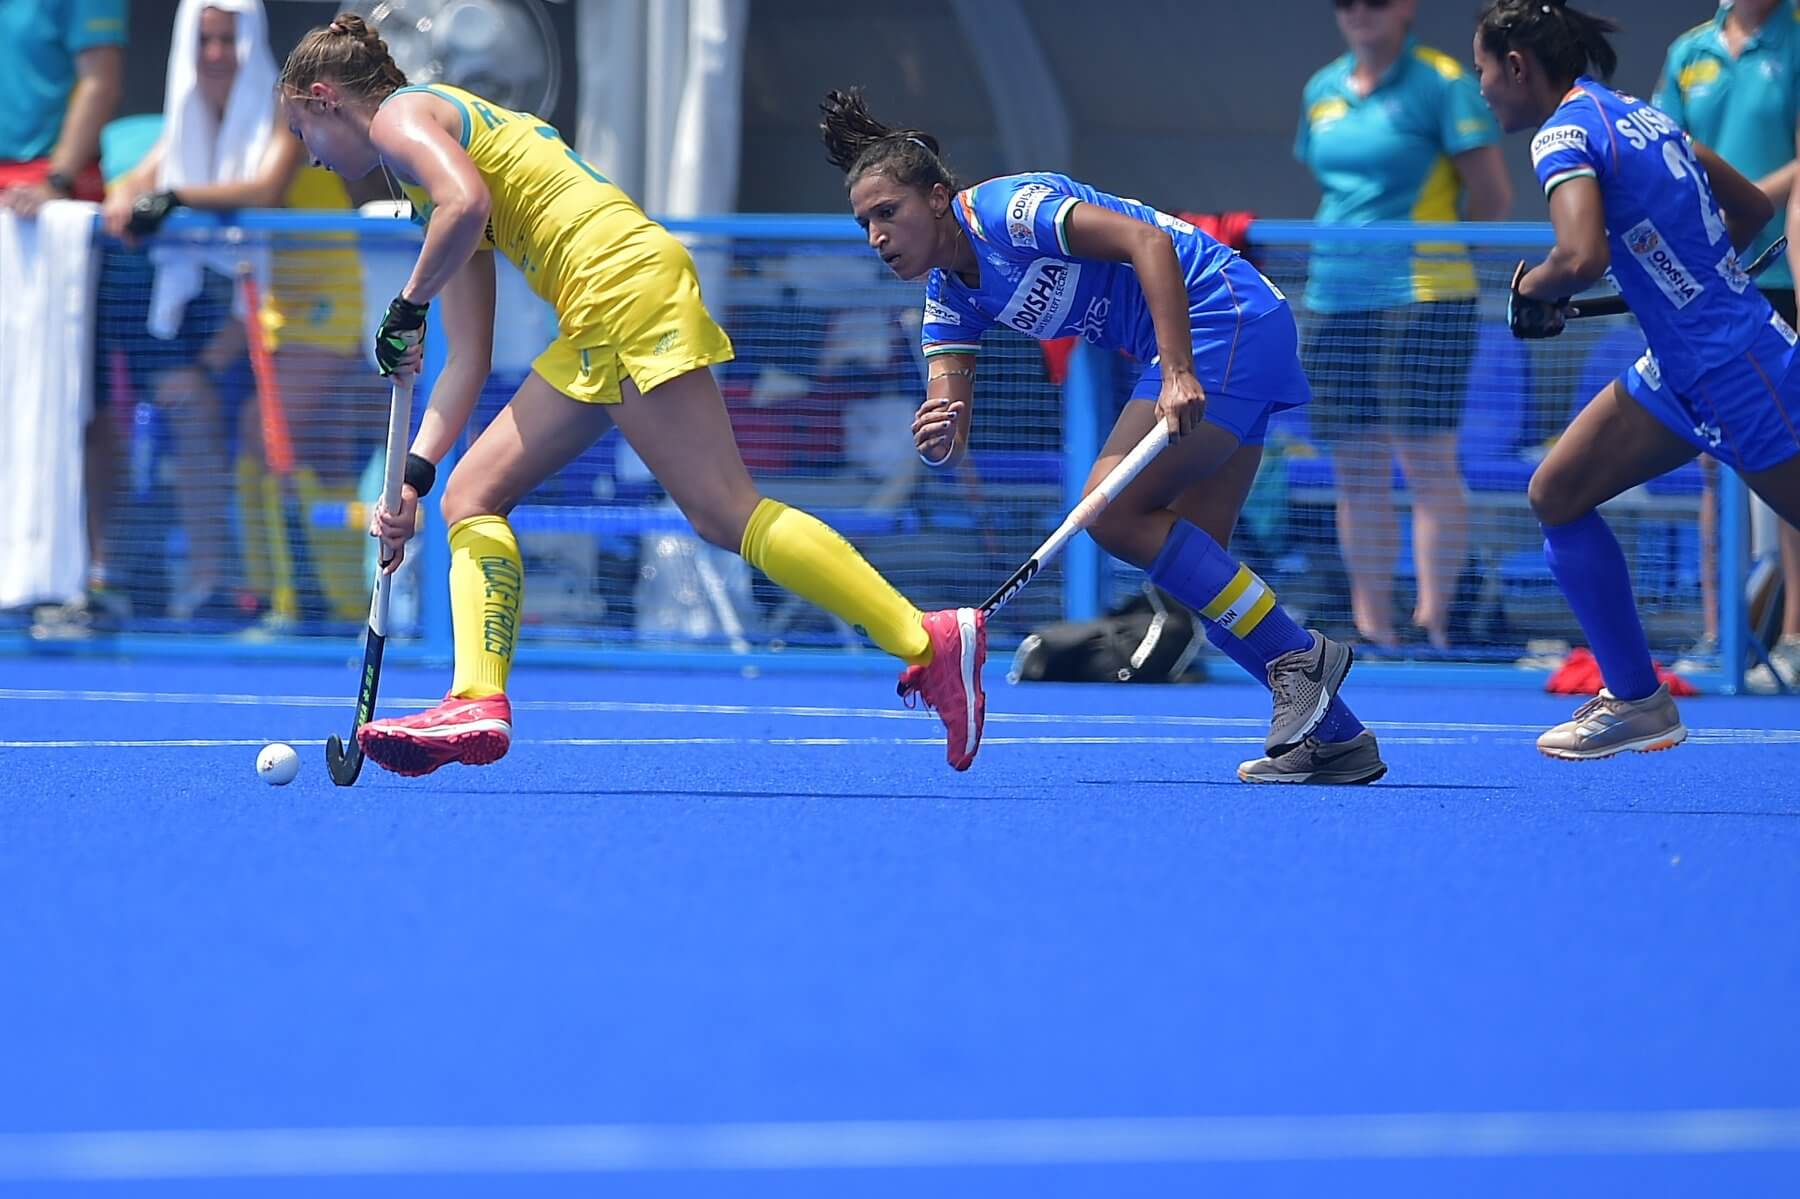 The Indian Women's Hockey team held the World No. 2 Australian team to a 2-2 draw today in their second round-robin match of the Olympic Test Event held here at the Oi Hockey Stadium. 